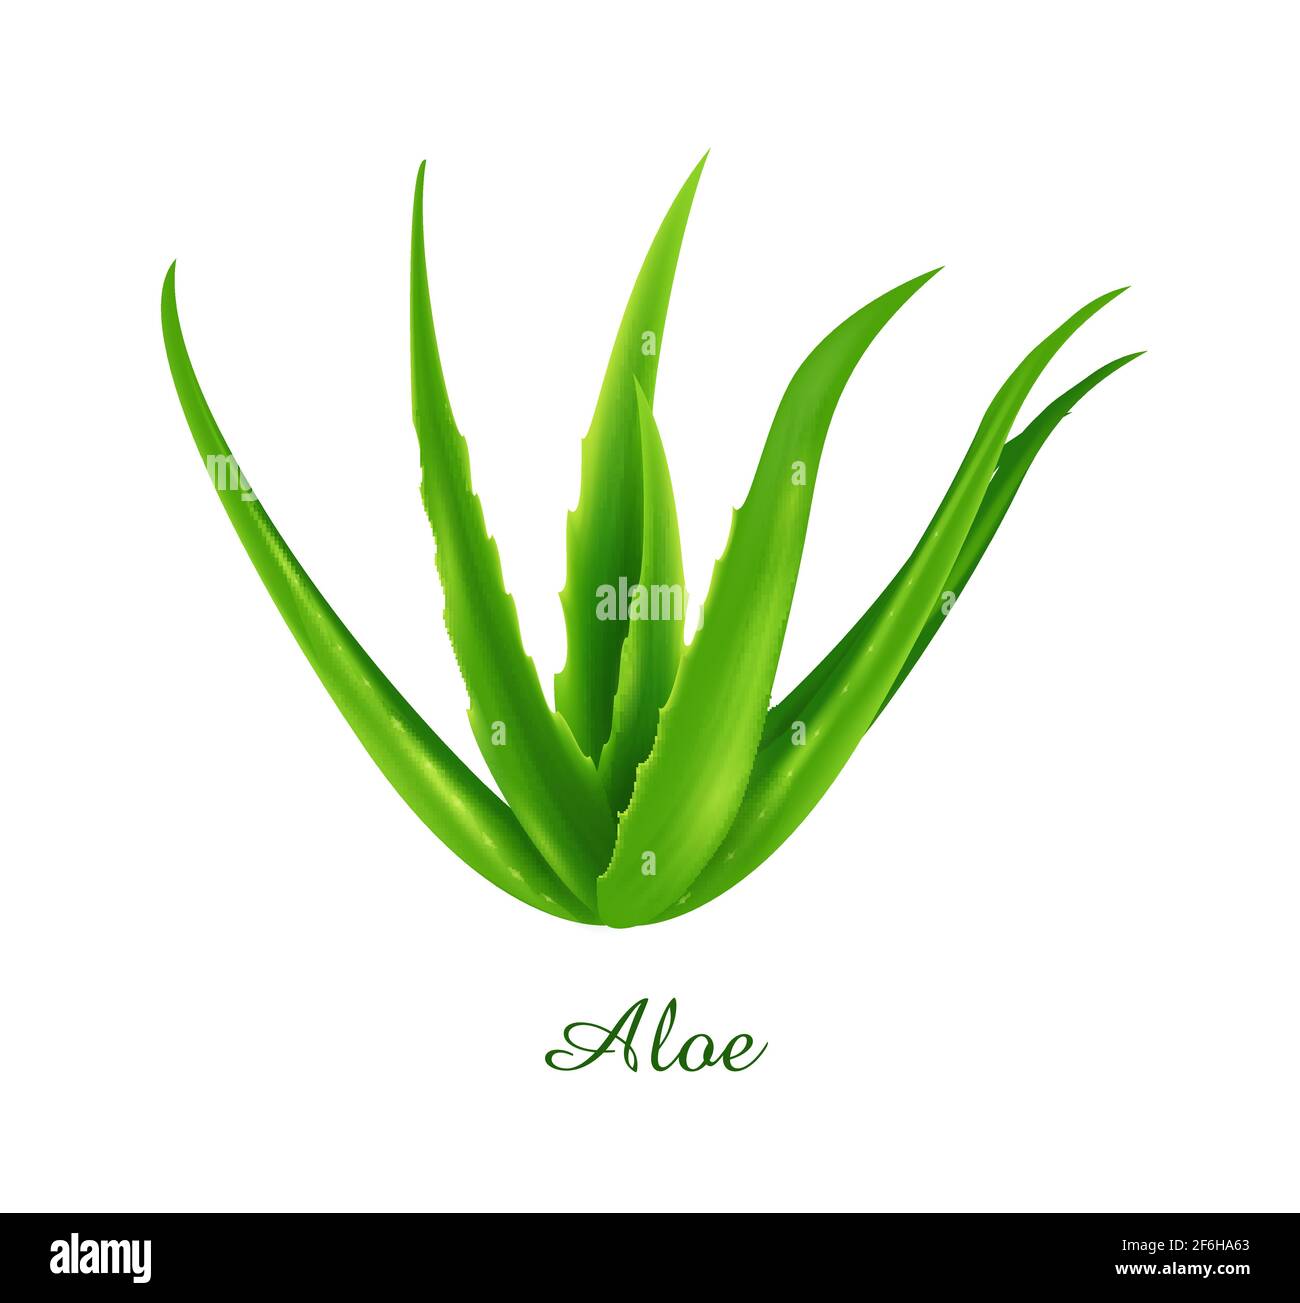 Aloe plant, green grasses herbs and plants collection, realistic vector illustration Stock Vector